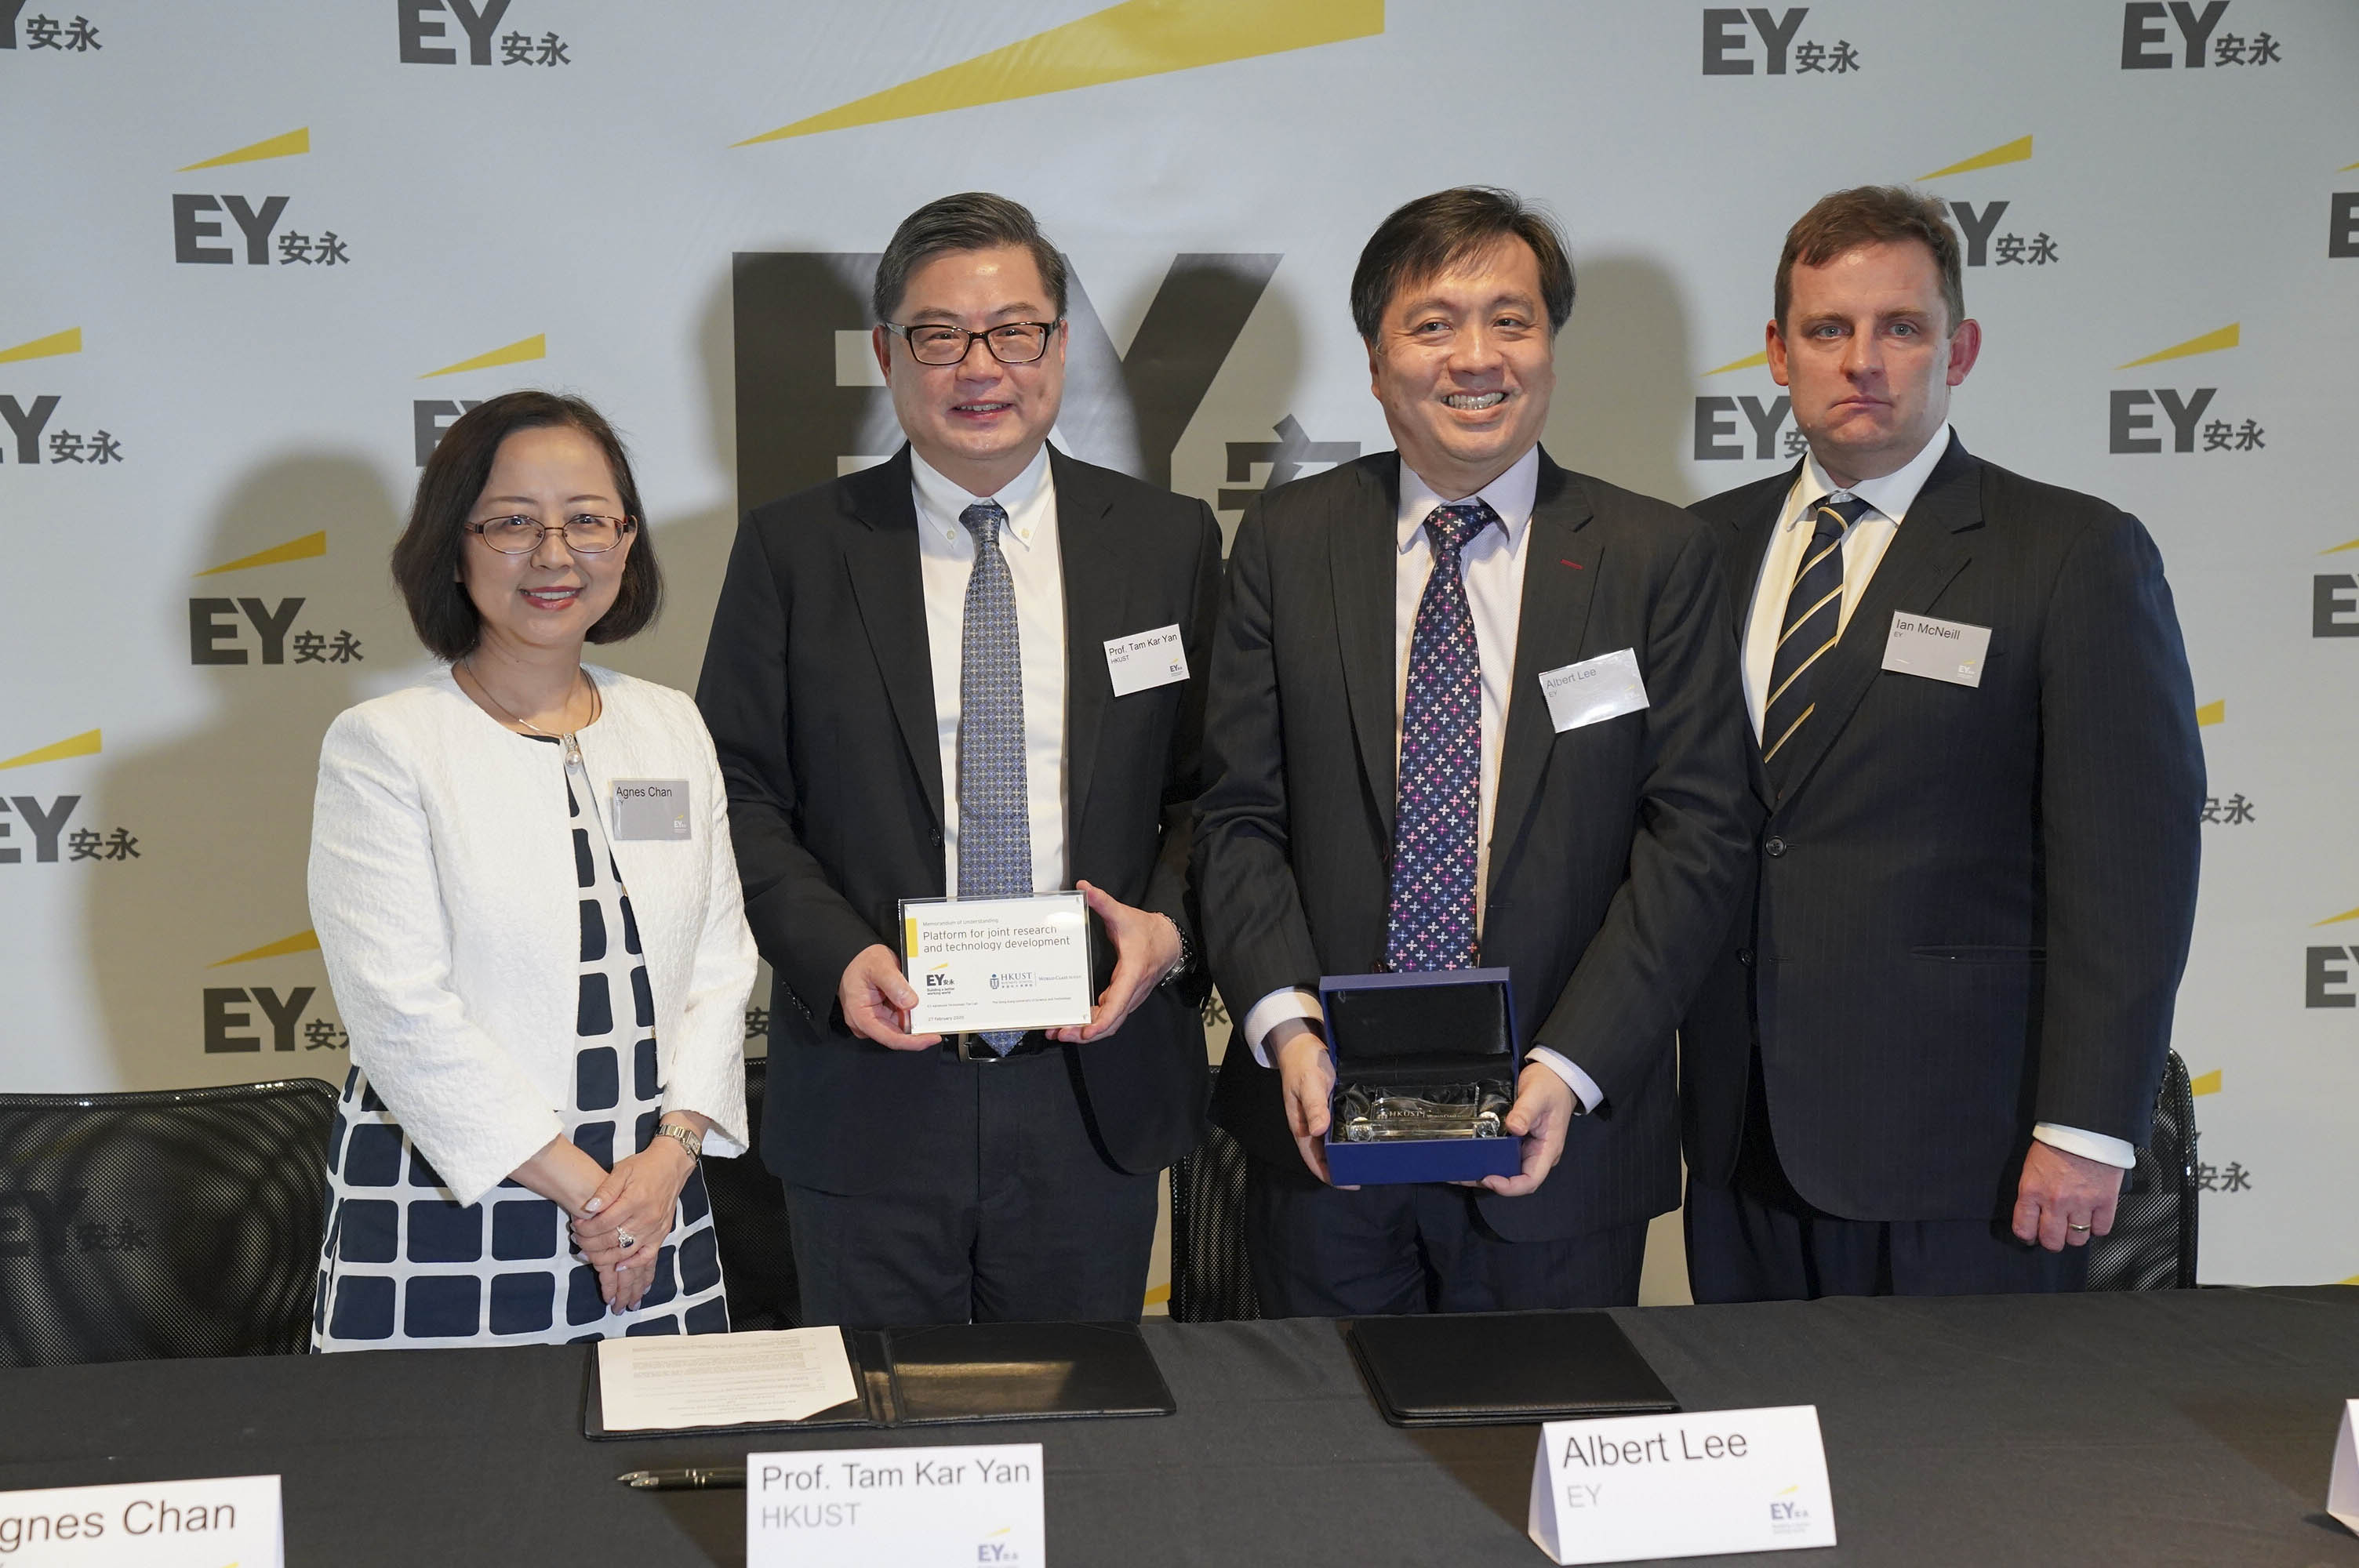 (From left) Agnes CHAN, EY Managing Partner – Hong Kong & Macau; Prof. TAM Kar Yan, Dean of HKUST Business School; Albert LEE, EY Global Tax Technology and Transformation Co-Leader and Asia-Pacific Tax Technology and Transformation Leader; and Ian MCNEILL, EY Asia Pacific Tax Deputy Leader 